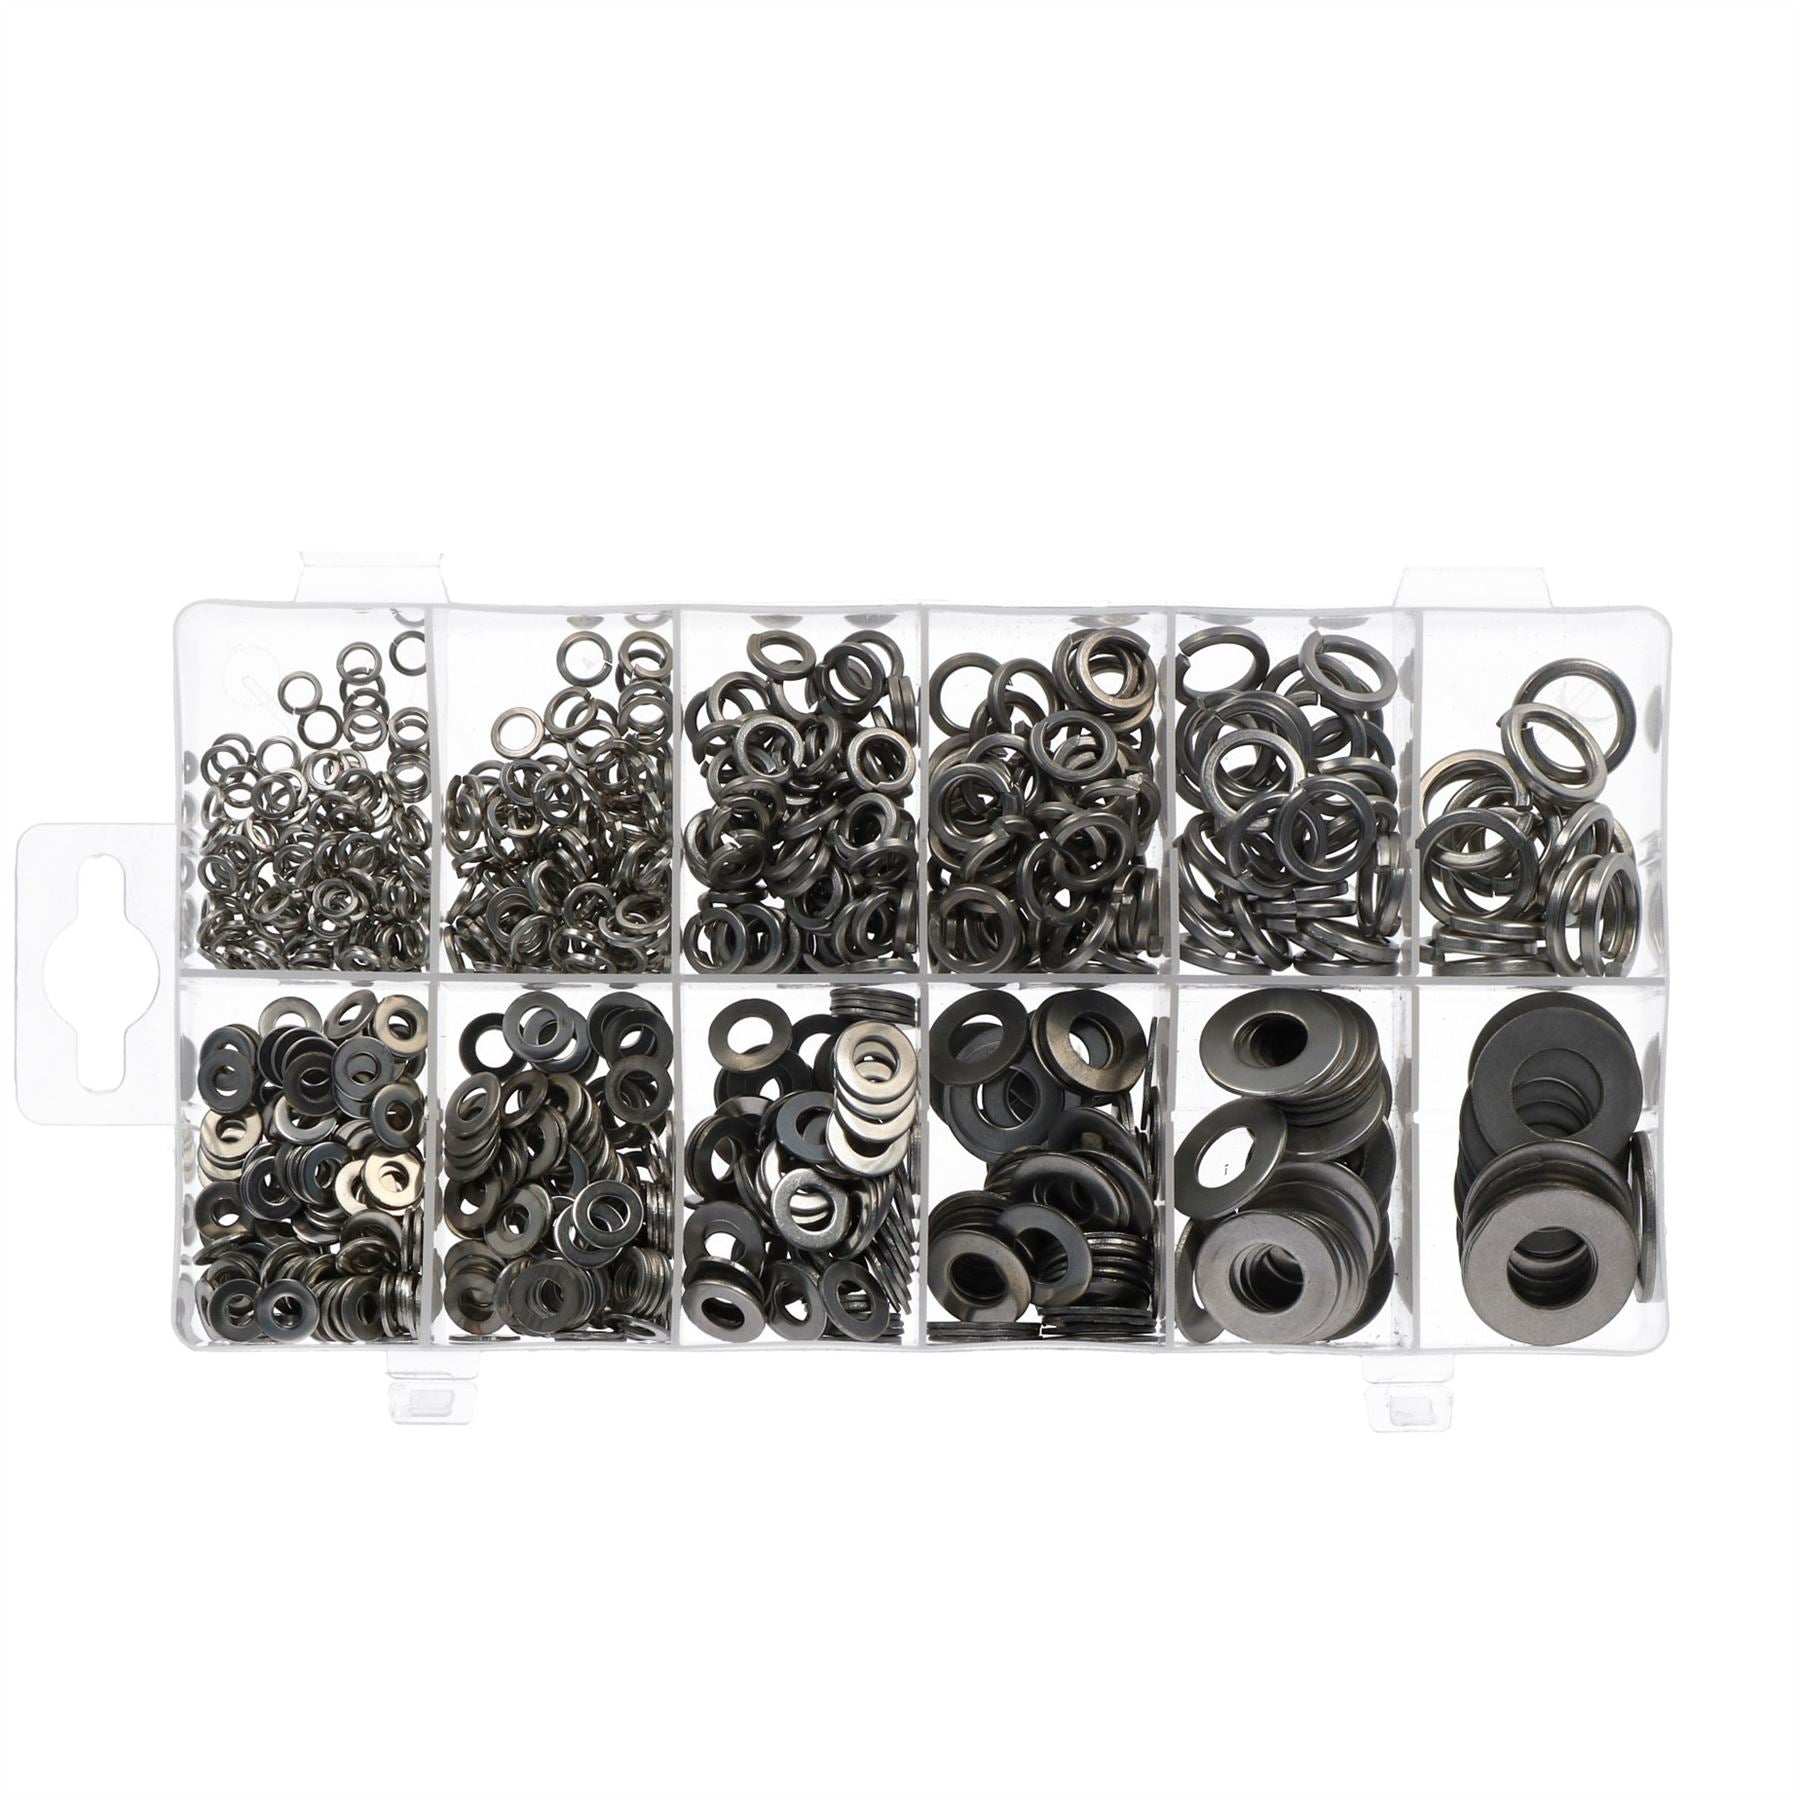 790pc Flat & Spring Washers Stainless Steel Rust Resistant Assortment Kit M4-M12